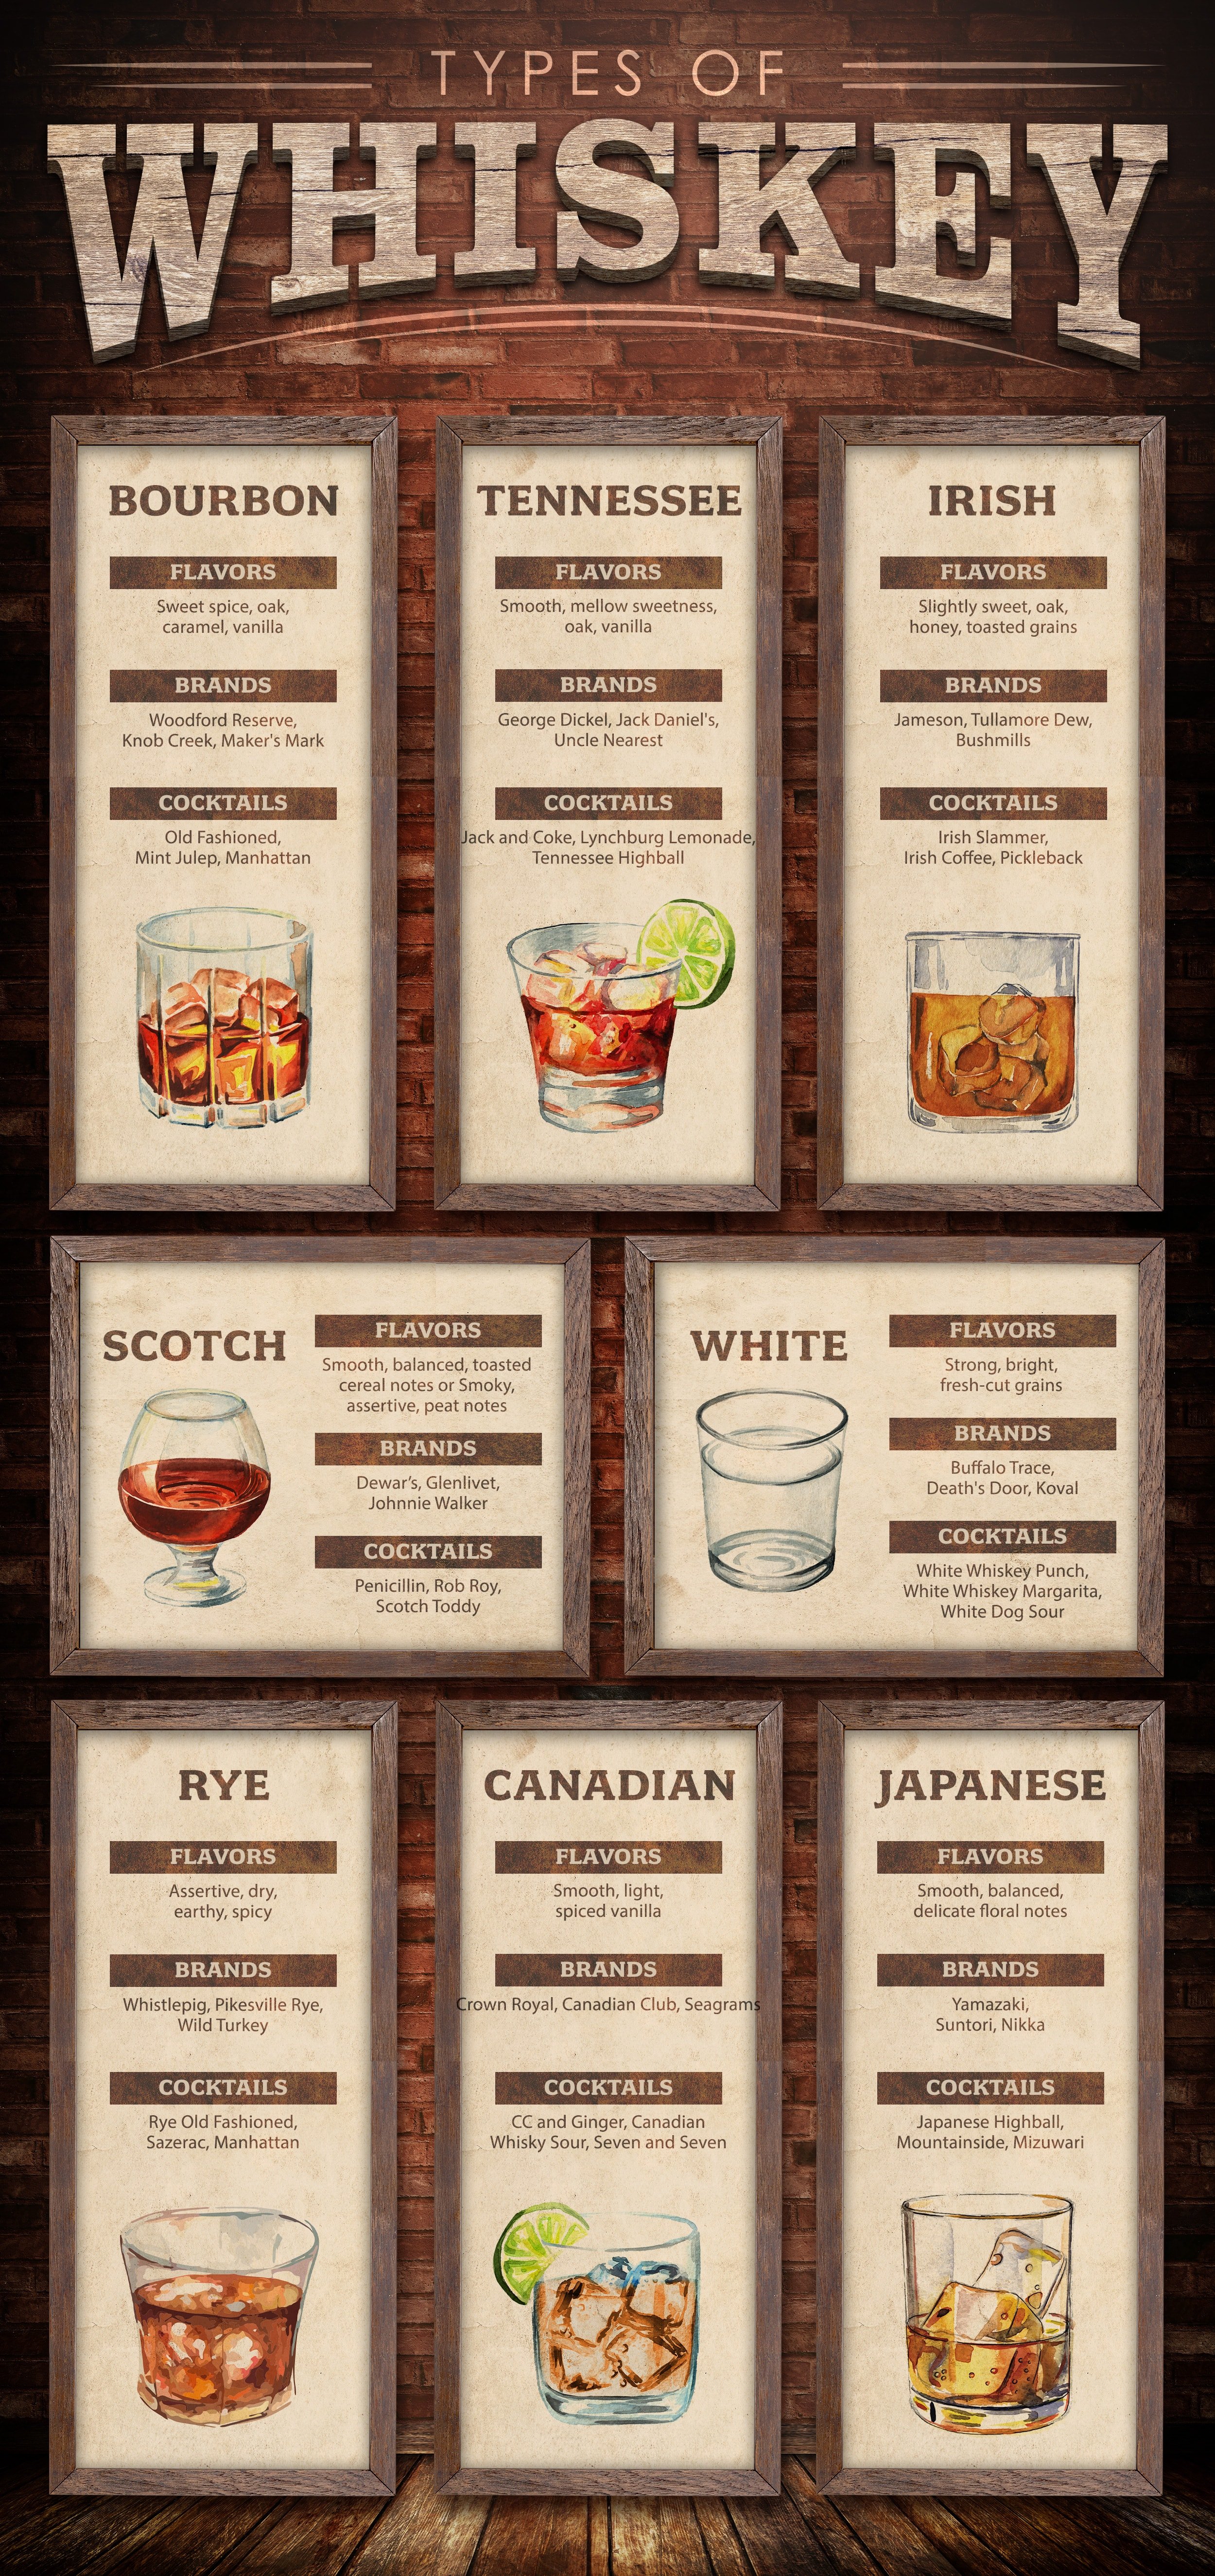 Types of Whiskey Infographic